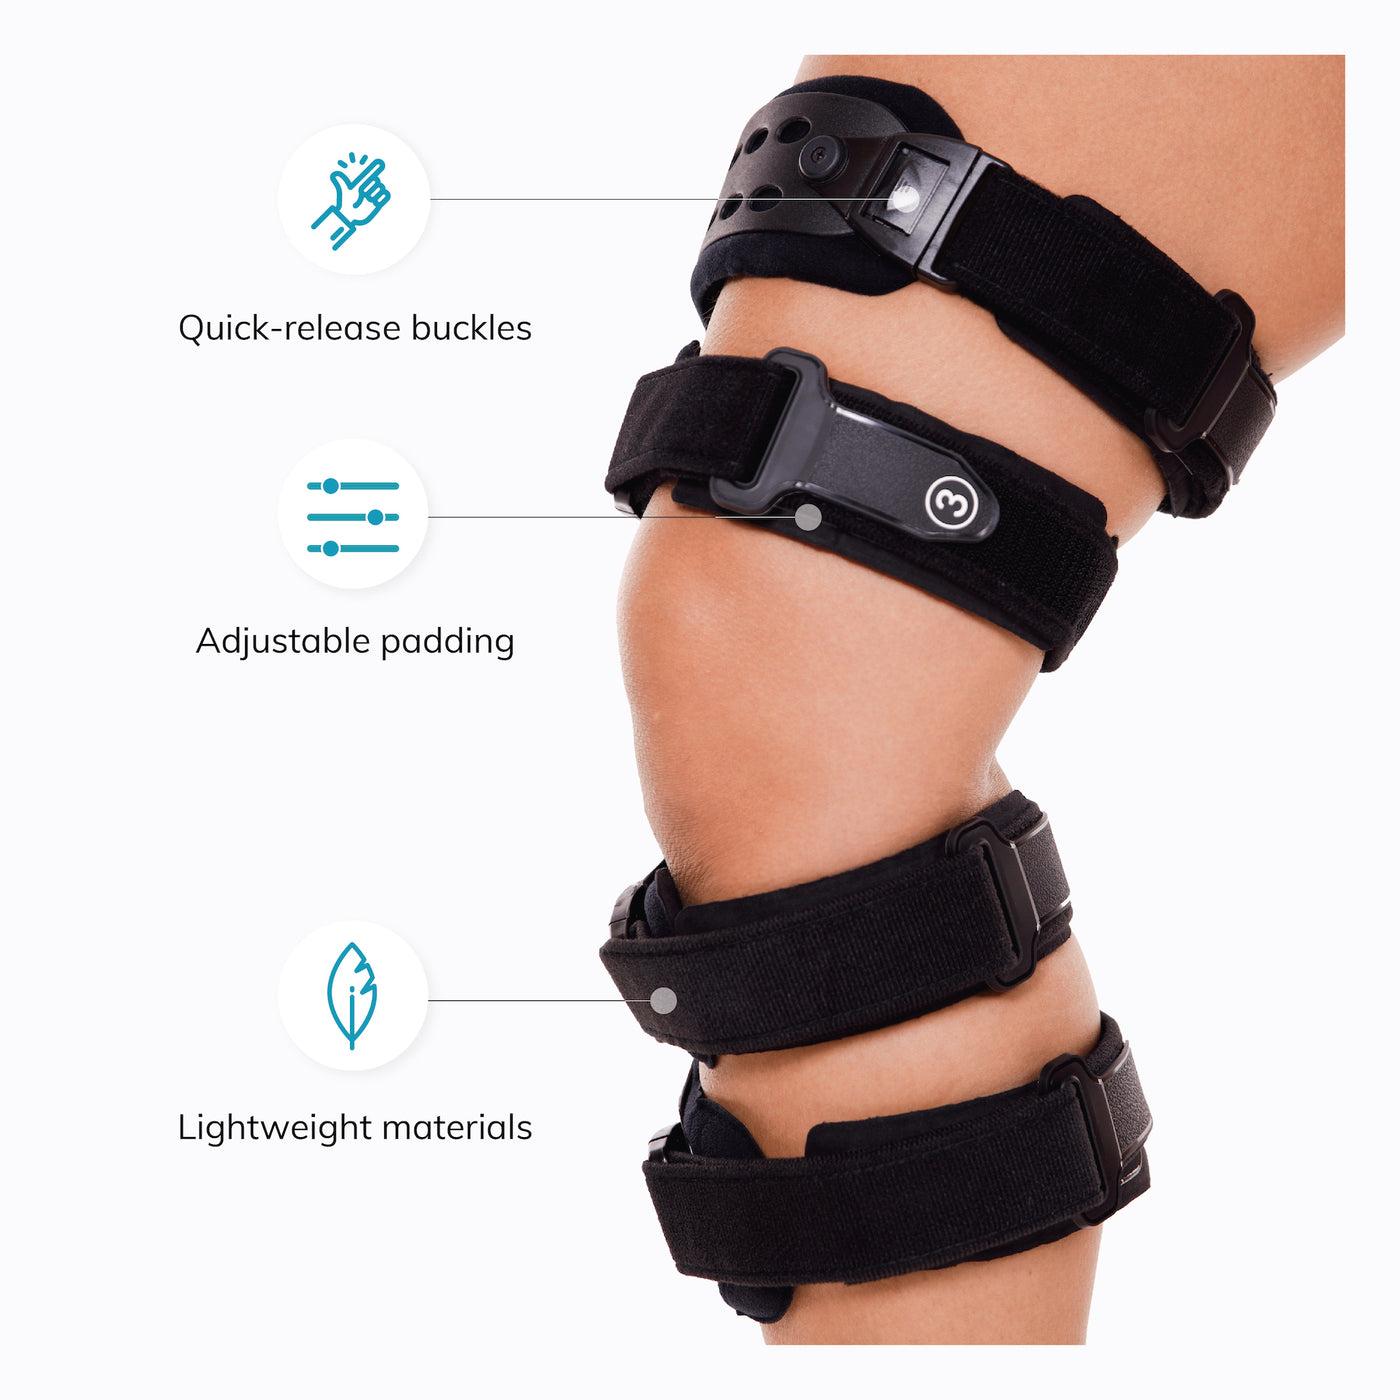 The adjustable OA knee support has quick-release buckles for easy application